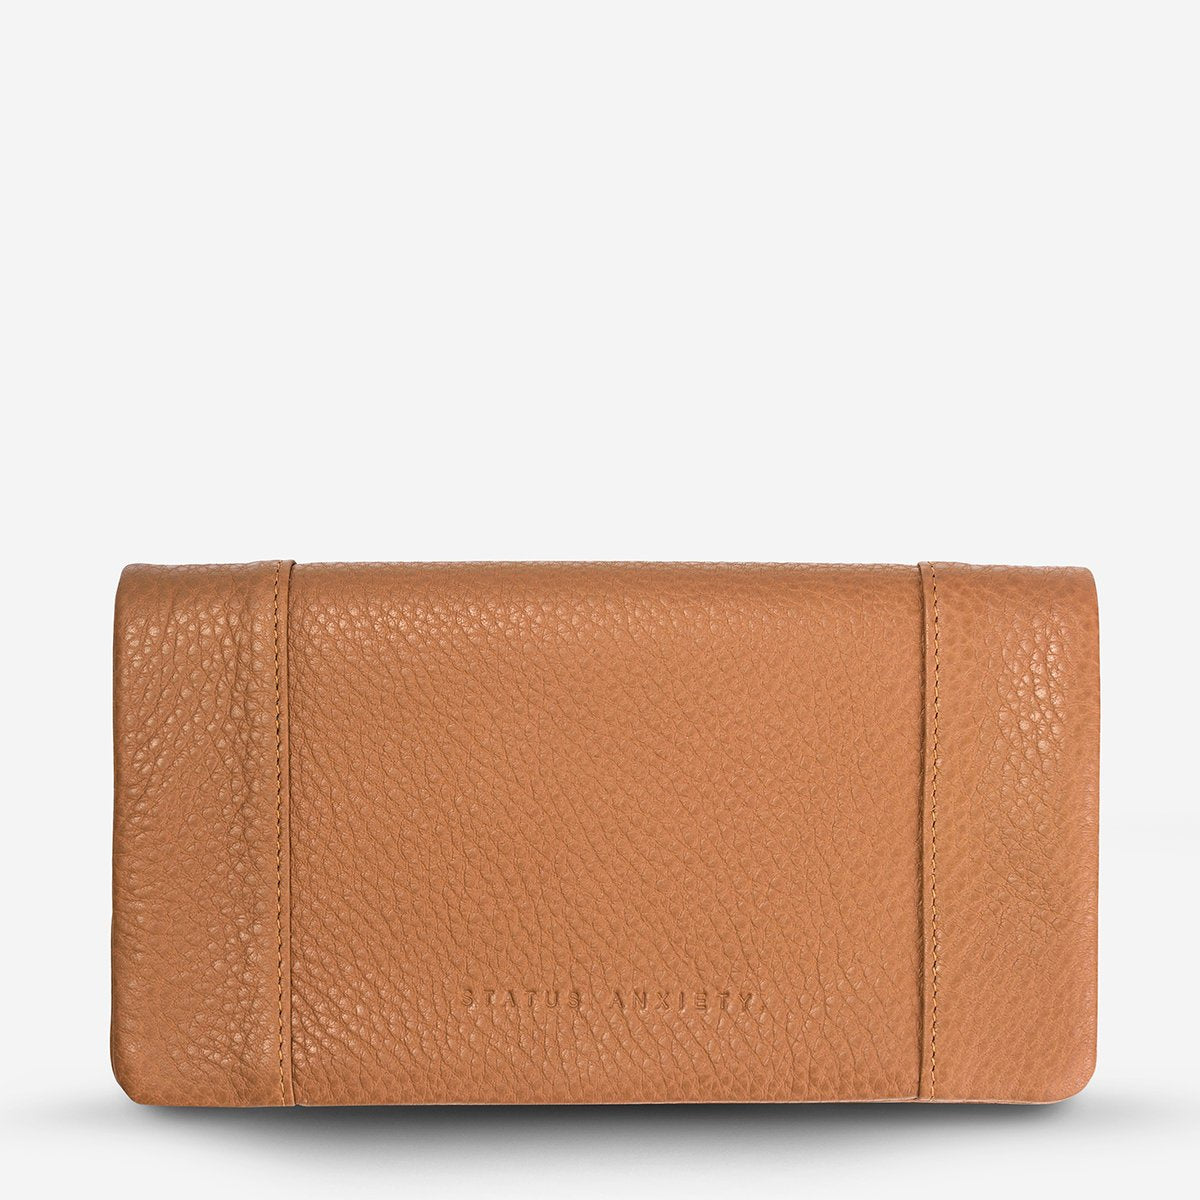 Status Anxiety | Some Type of Love  Wallet - Found My Way Invercargill